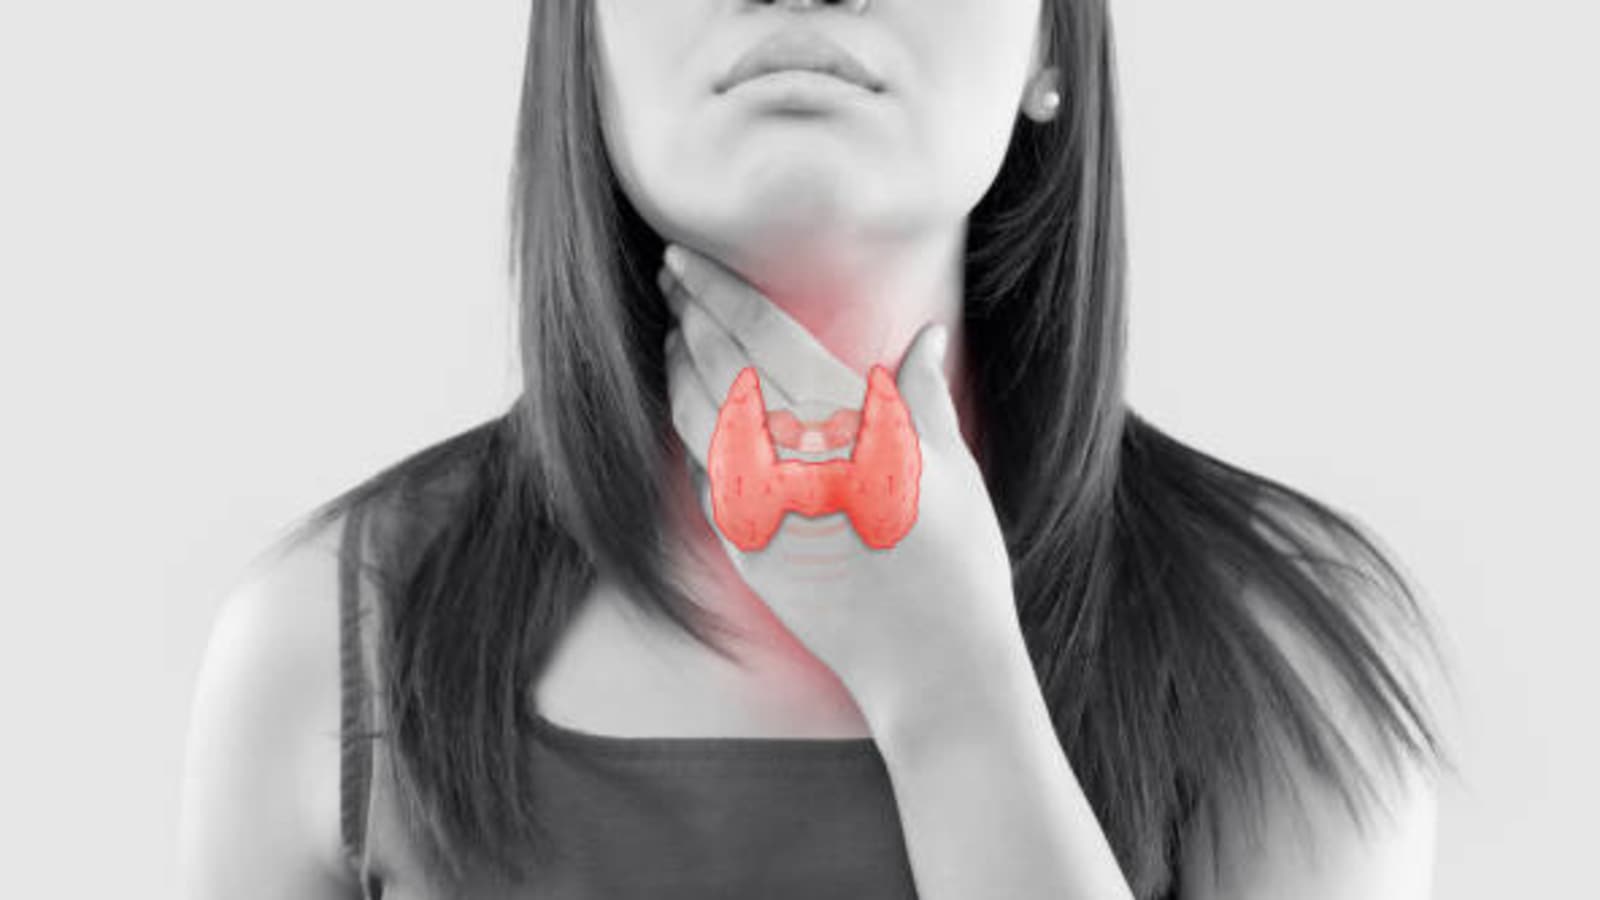 thyroid-cancer-in-women-rising-know-warning-signs-causes-tips-for-treatment